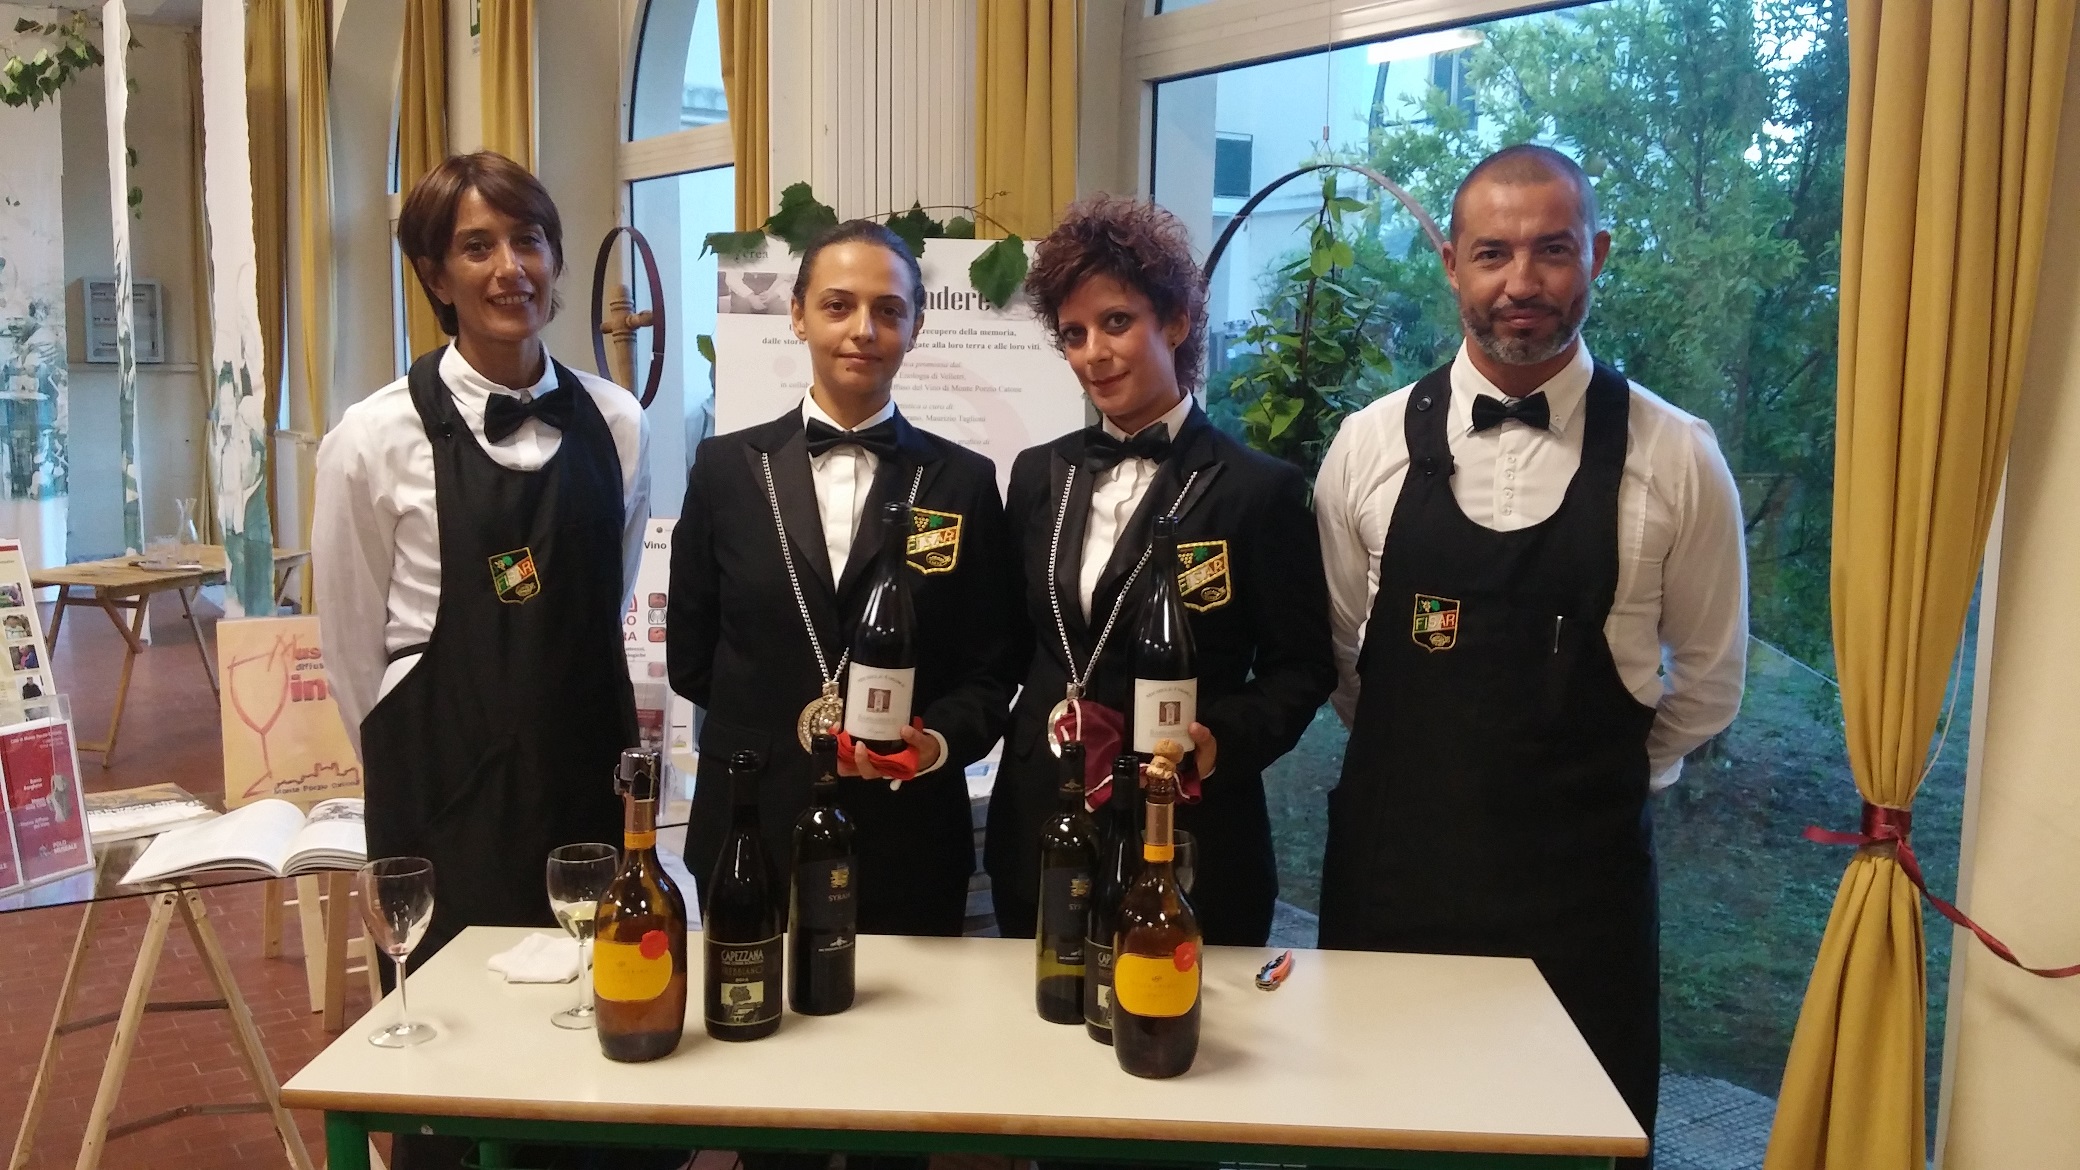 http://ideeinfermento.it/wp/wp-content/uploads/2017/05/Tutti-giù-in-cantina-sommelier-FISAR.jpg